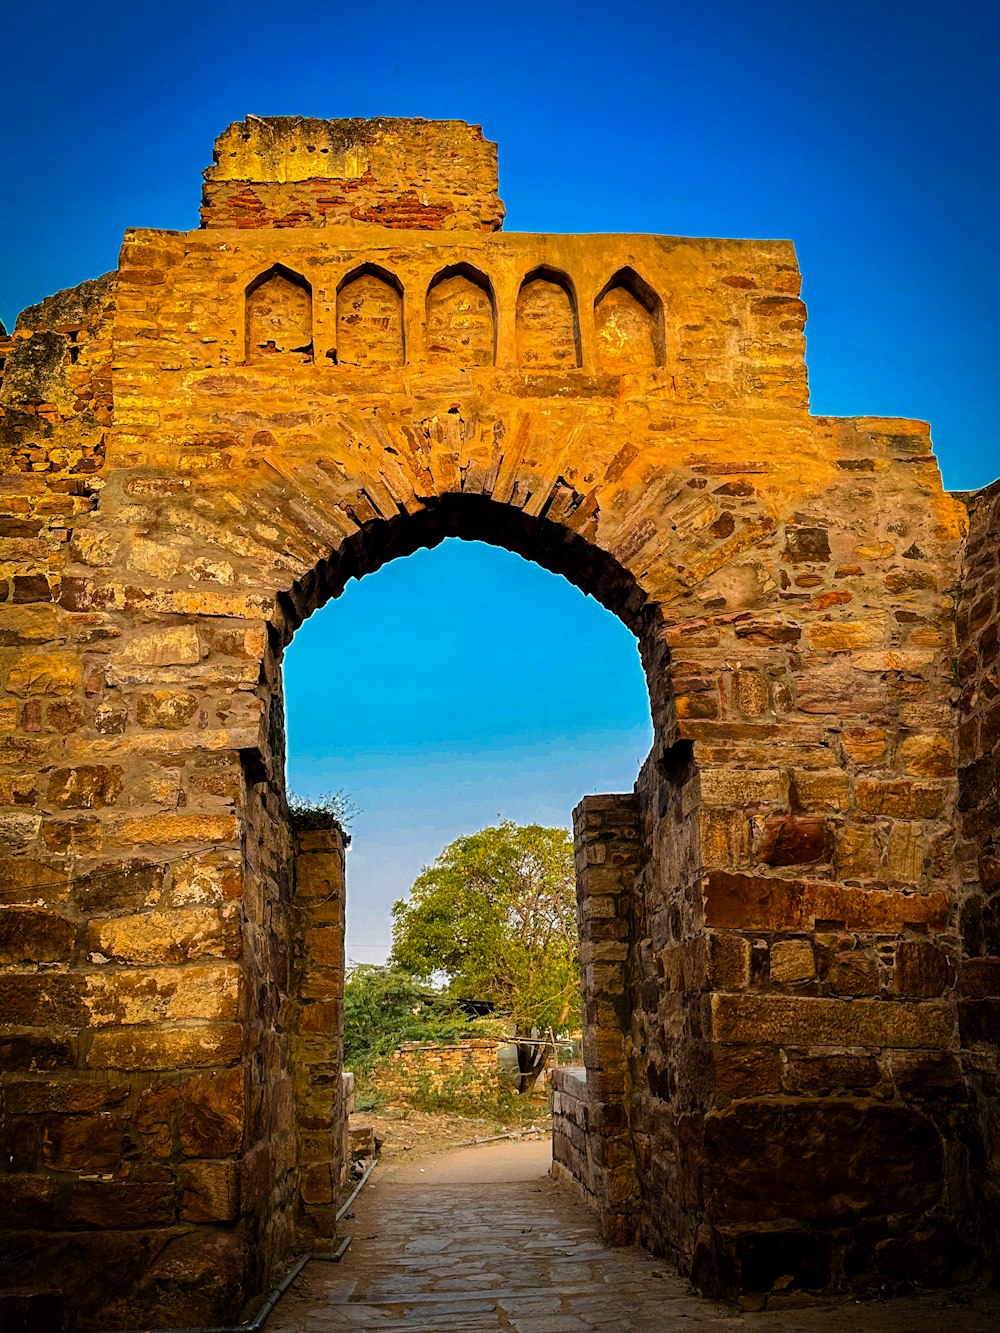 a stone archway with a blue sky in the background